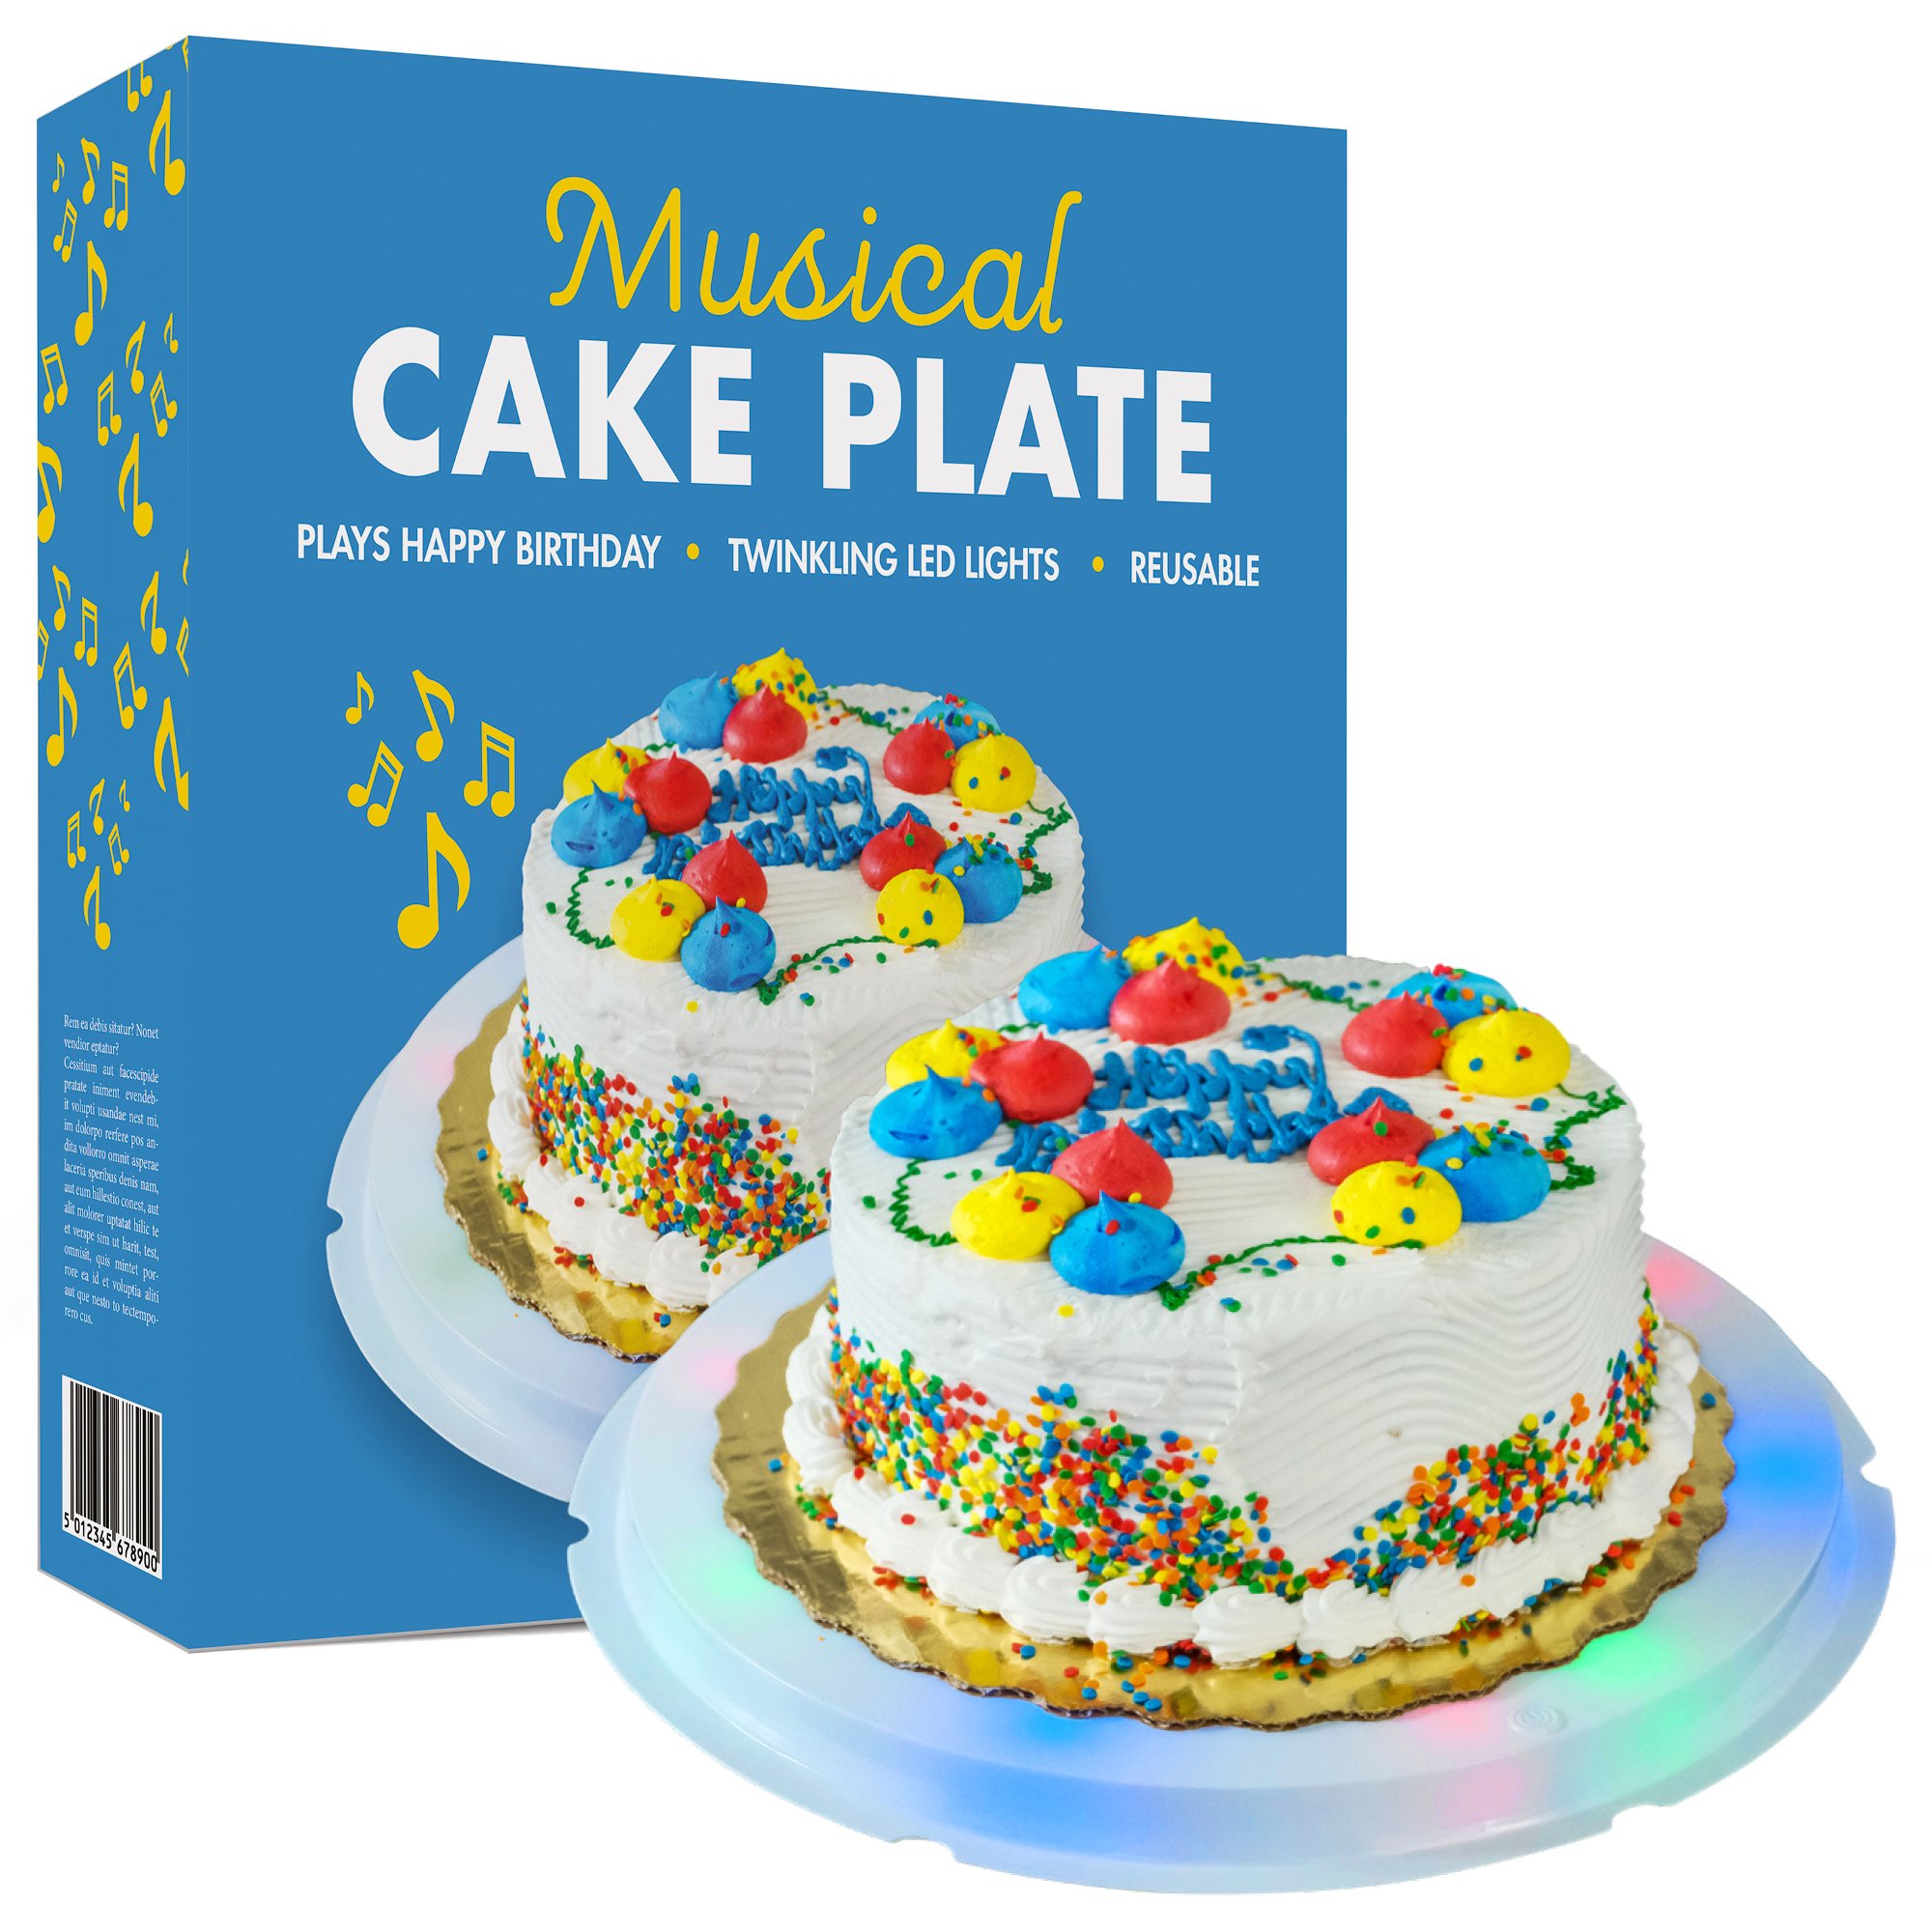 Musical Cake Plate Cake Stand Plays Happy Birthday Song with LED Lights 12  Inch Large White Plastic Platter Fits Up to 10.5 Inch Round Cake or Pie  AAA Battery